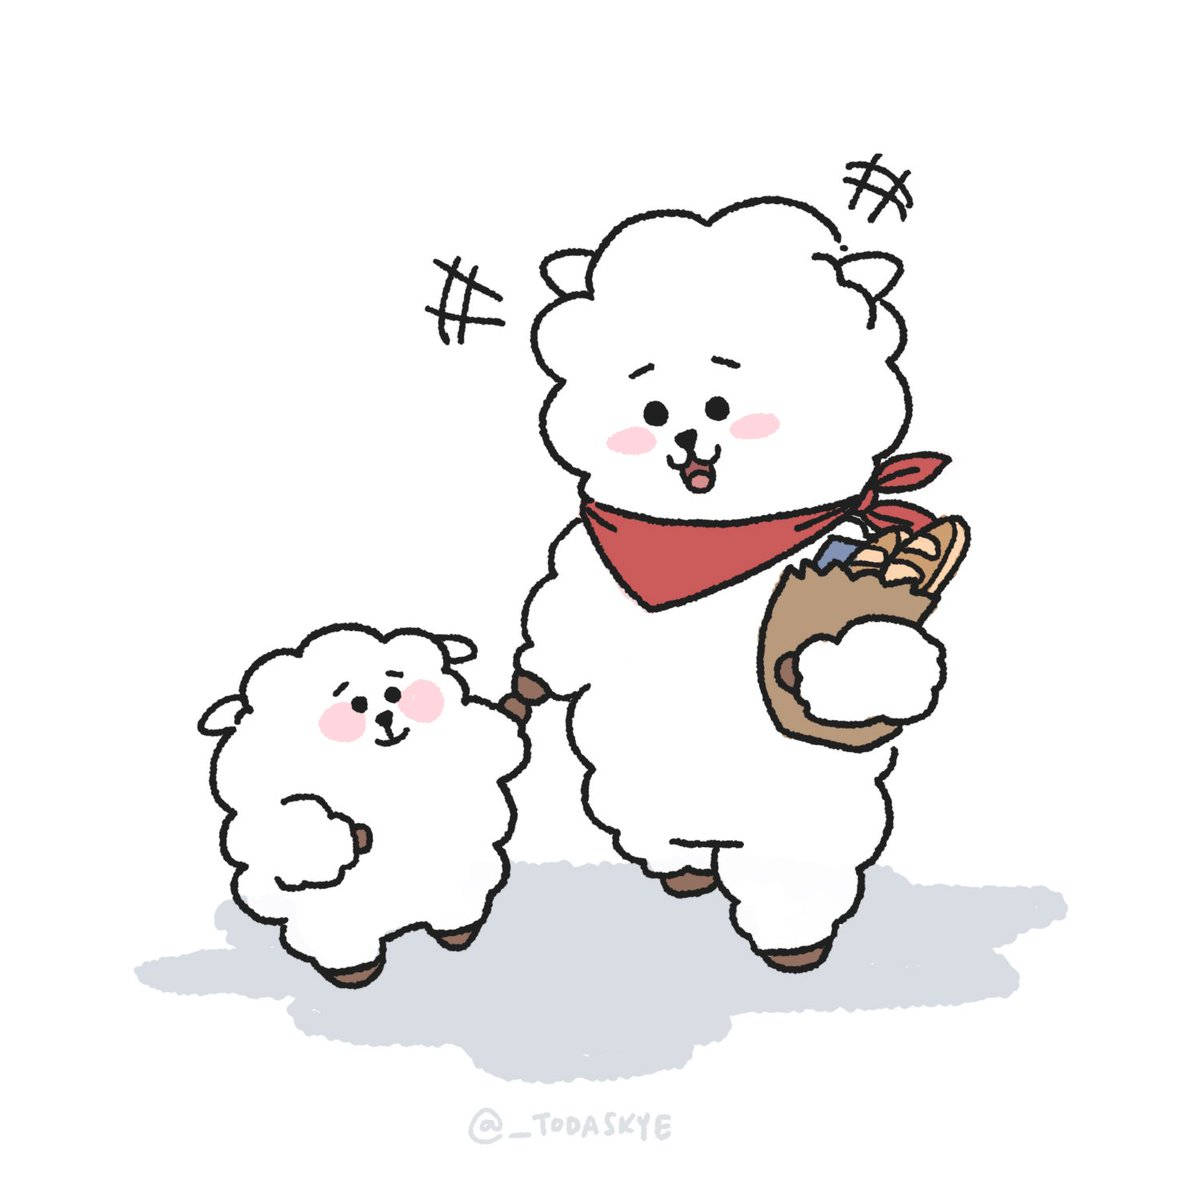 Rk And Rj Bt21